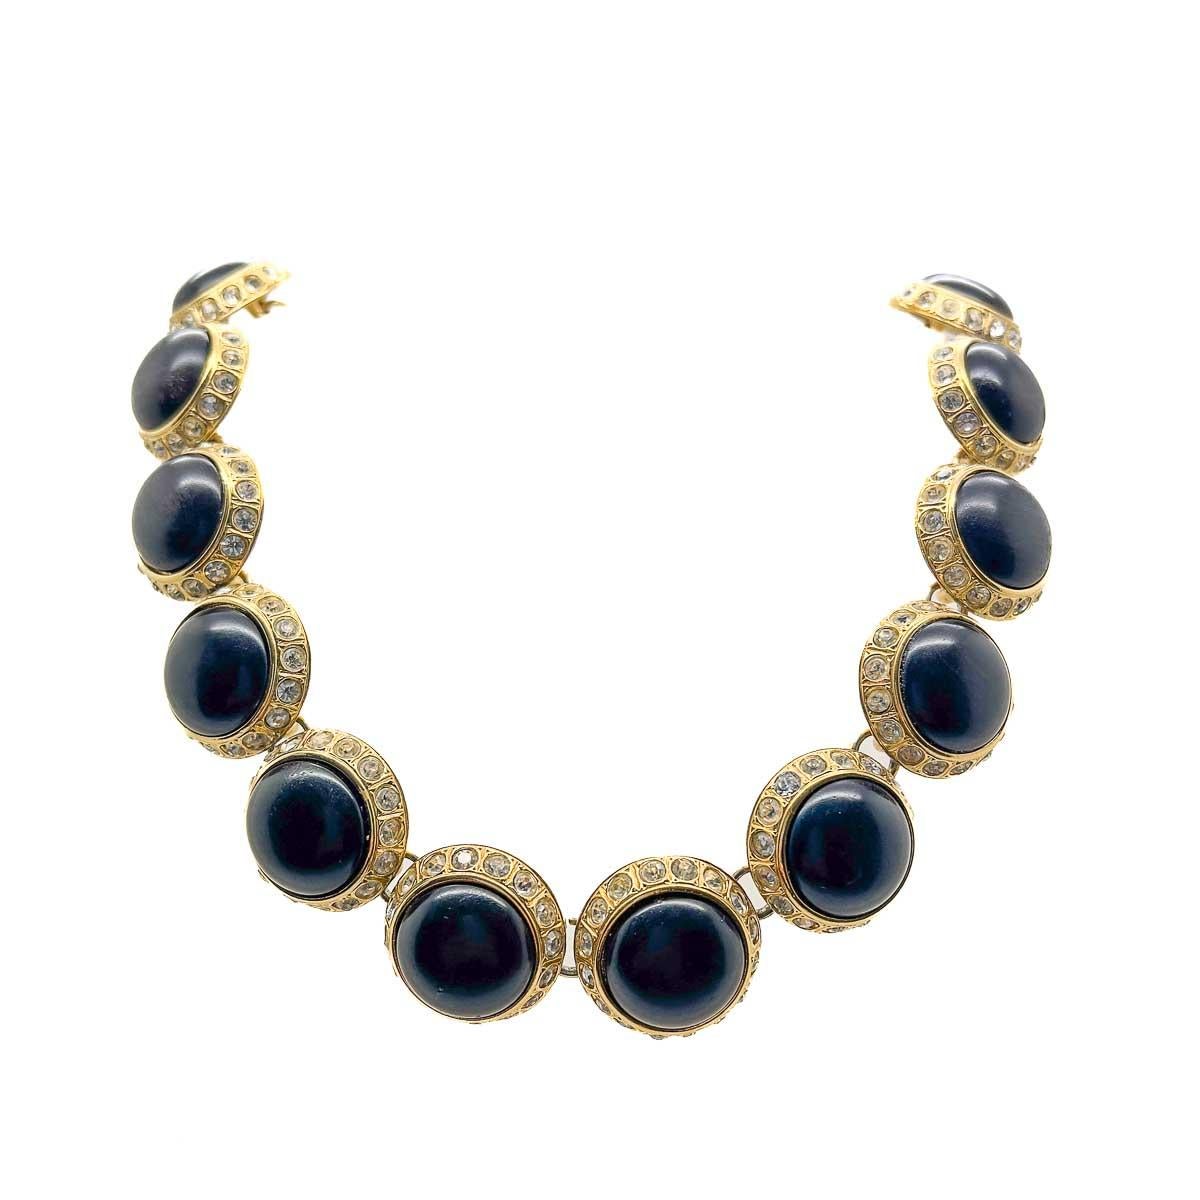 A Vintage YSL Cabochon Necklace. A seriously stylish riviere necklace design embellished with dramatic black cabochons and accented with chaton crystals for peak glamour. A totally timeless design from the iconic House of Yves Saint Laurent.
In